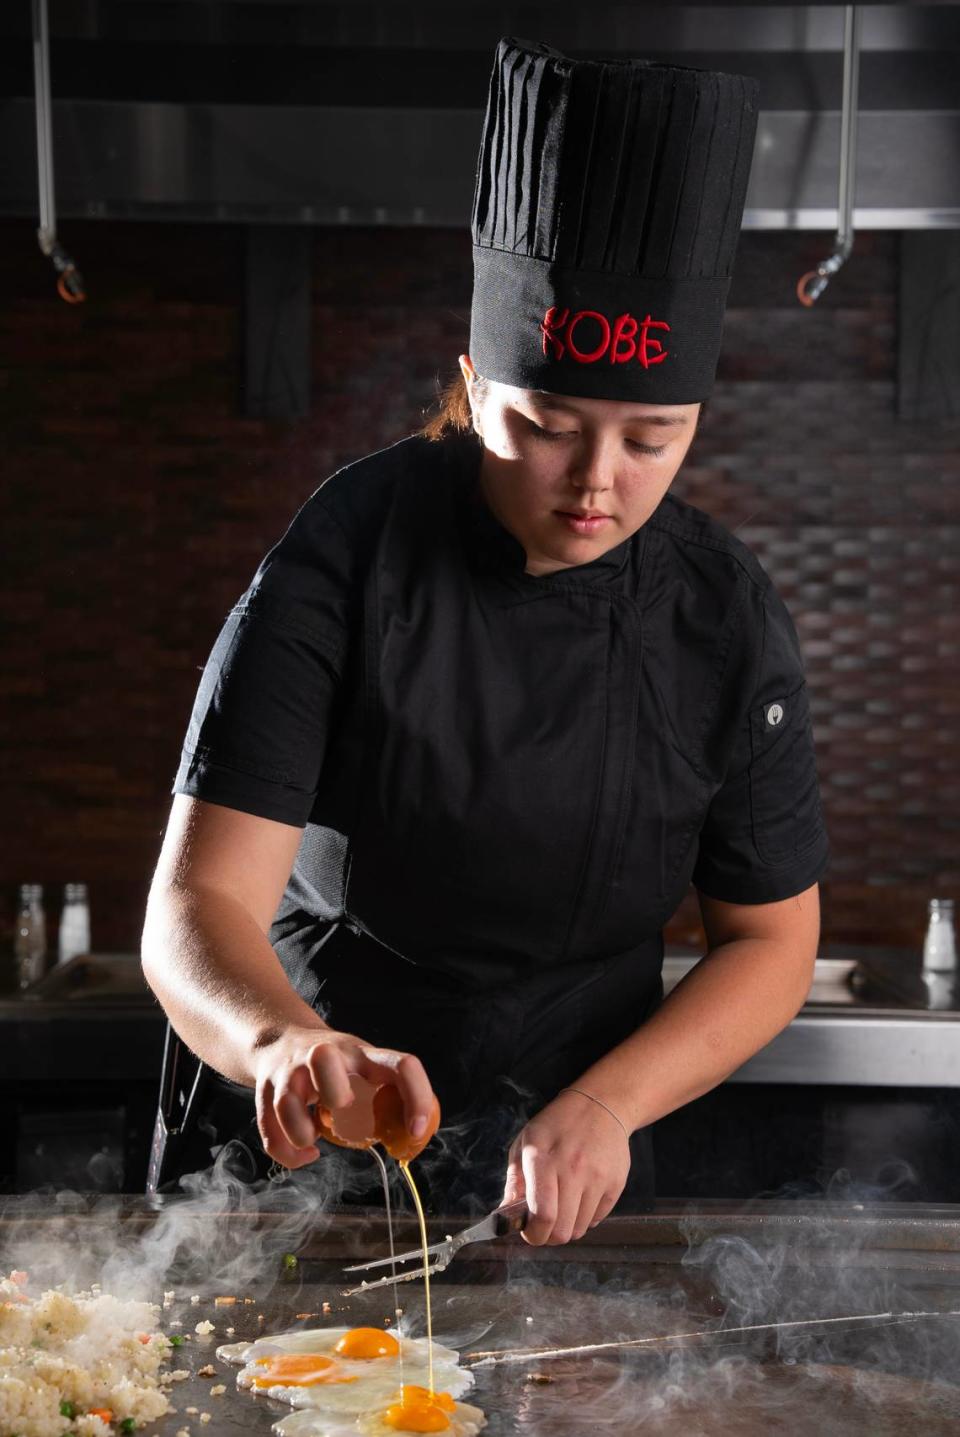 Kobe Japanese Steakhouse chef Evelynn Harader was recently promoted from kitchen assistant to performing hibachi chef.